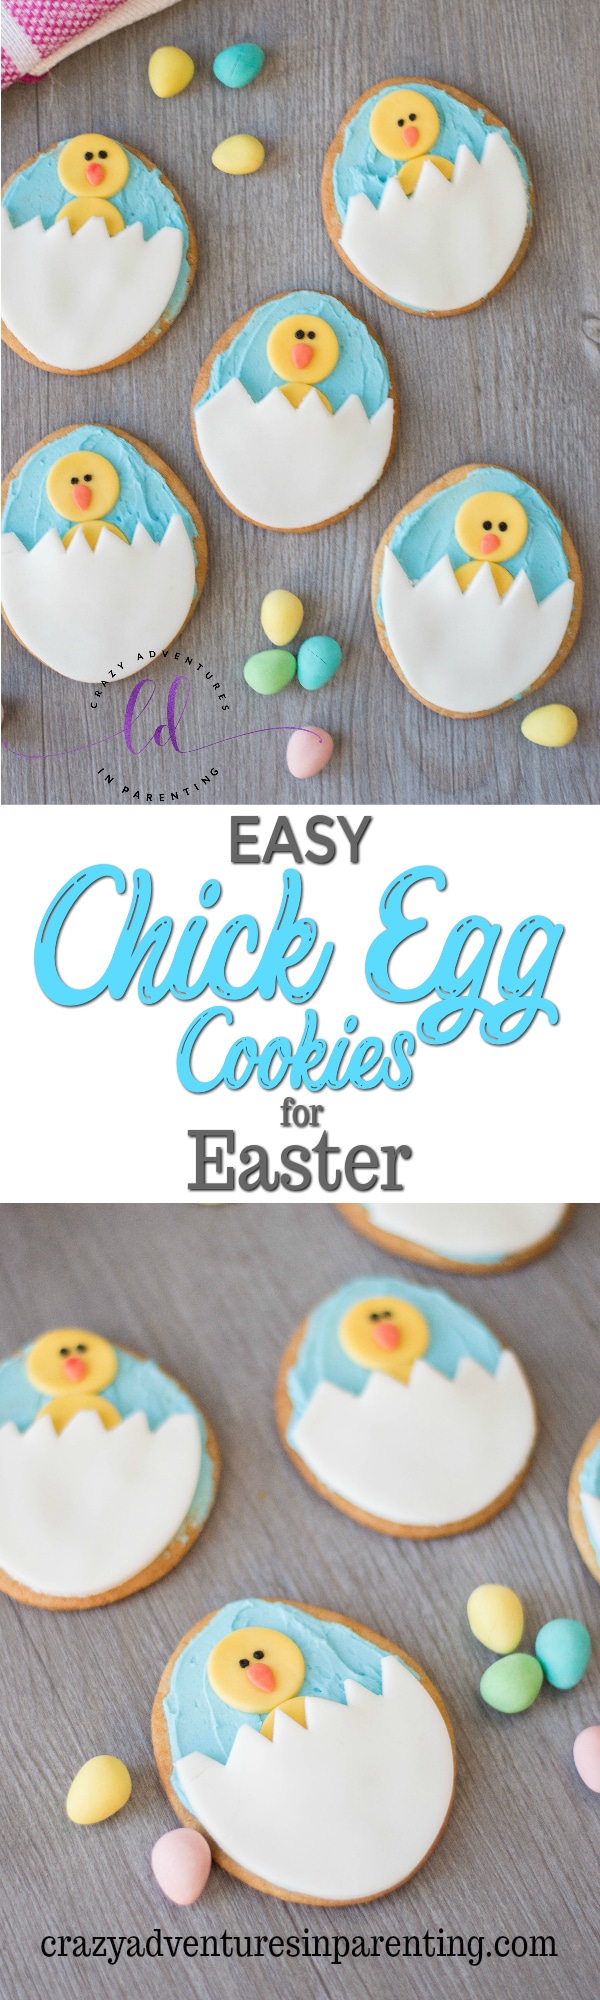 Easy Chick Egg Cookies for Easter